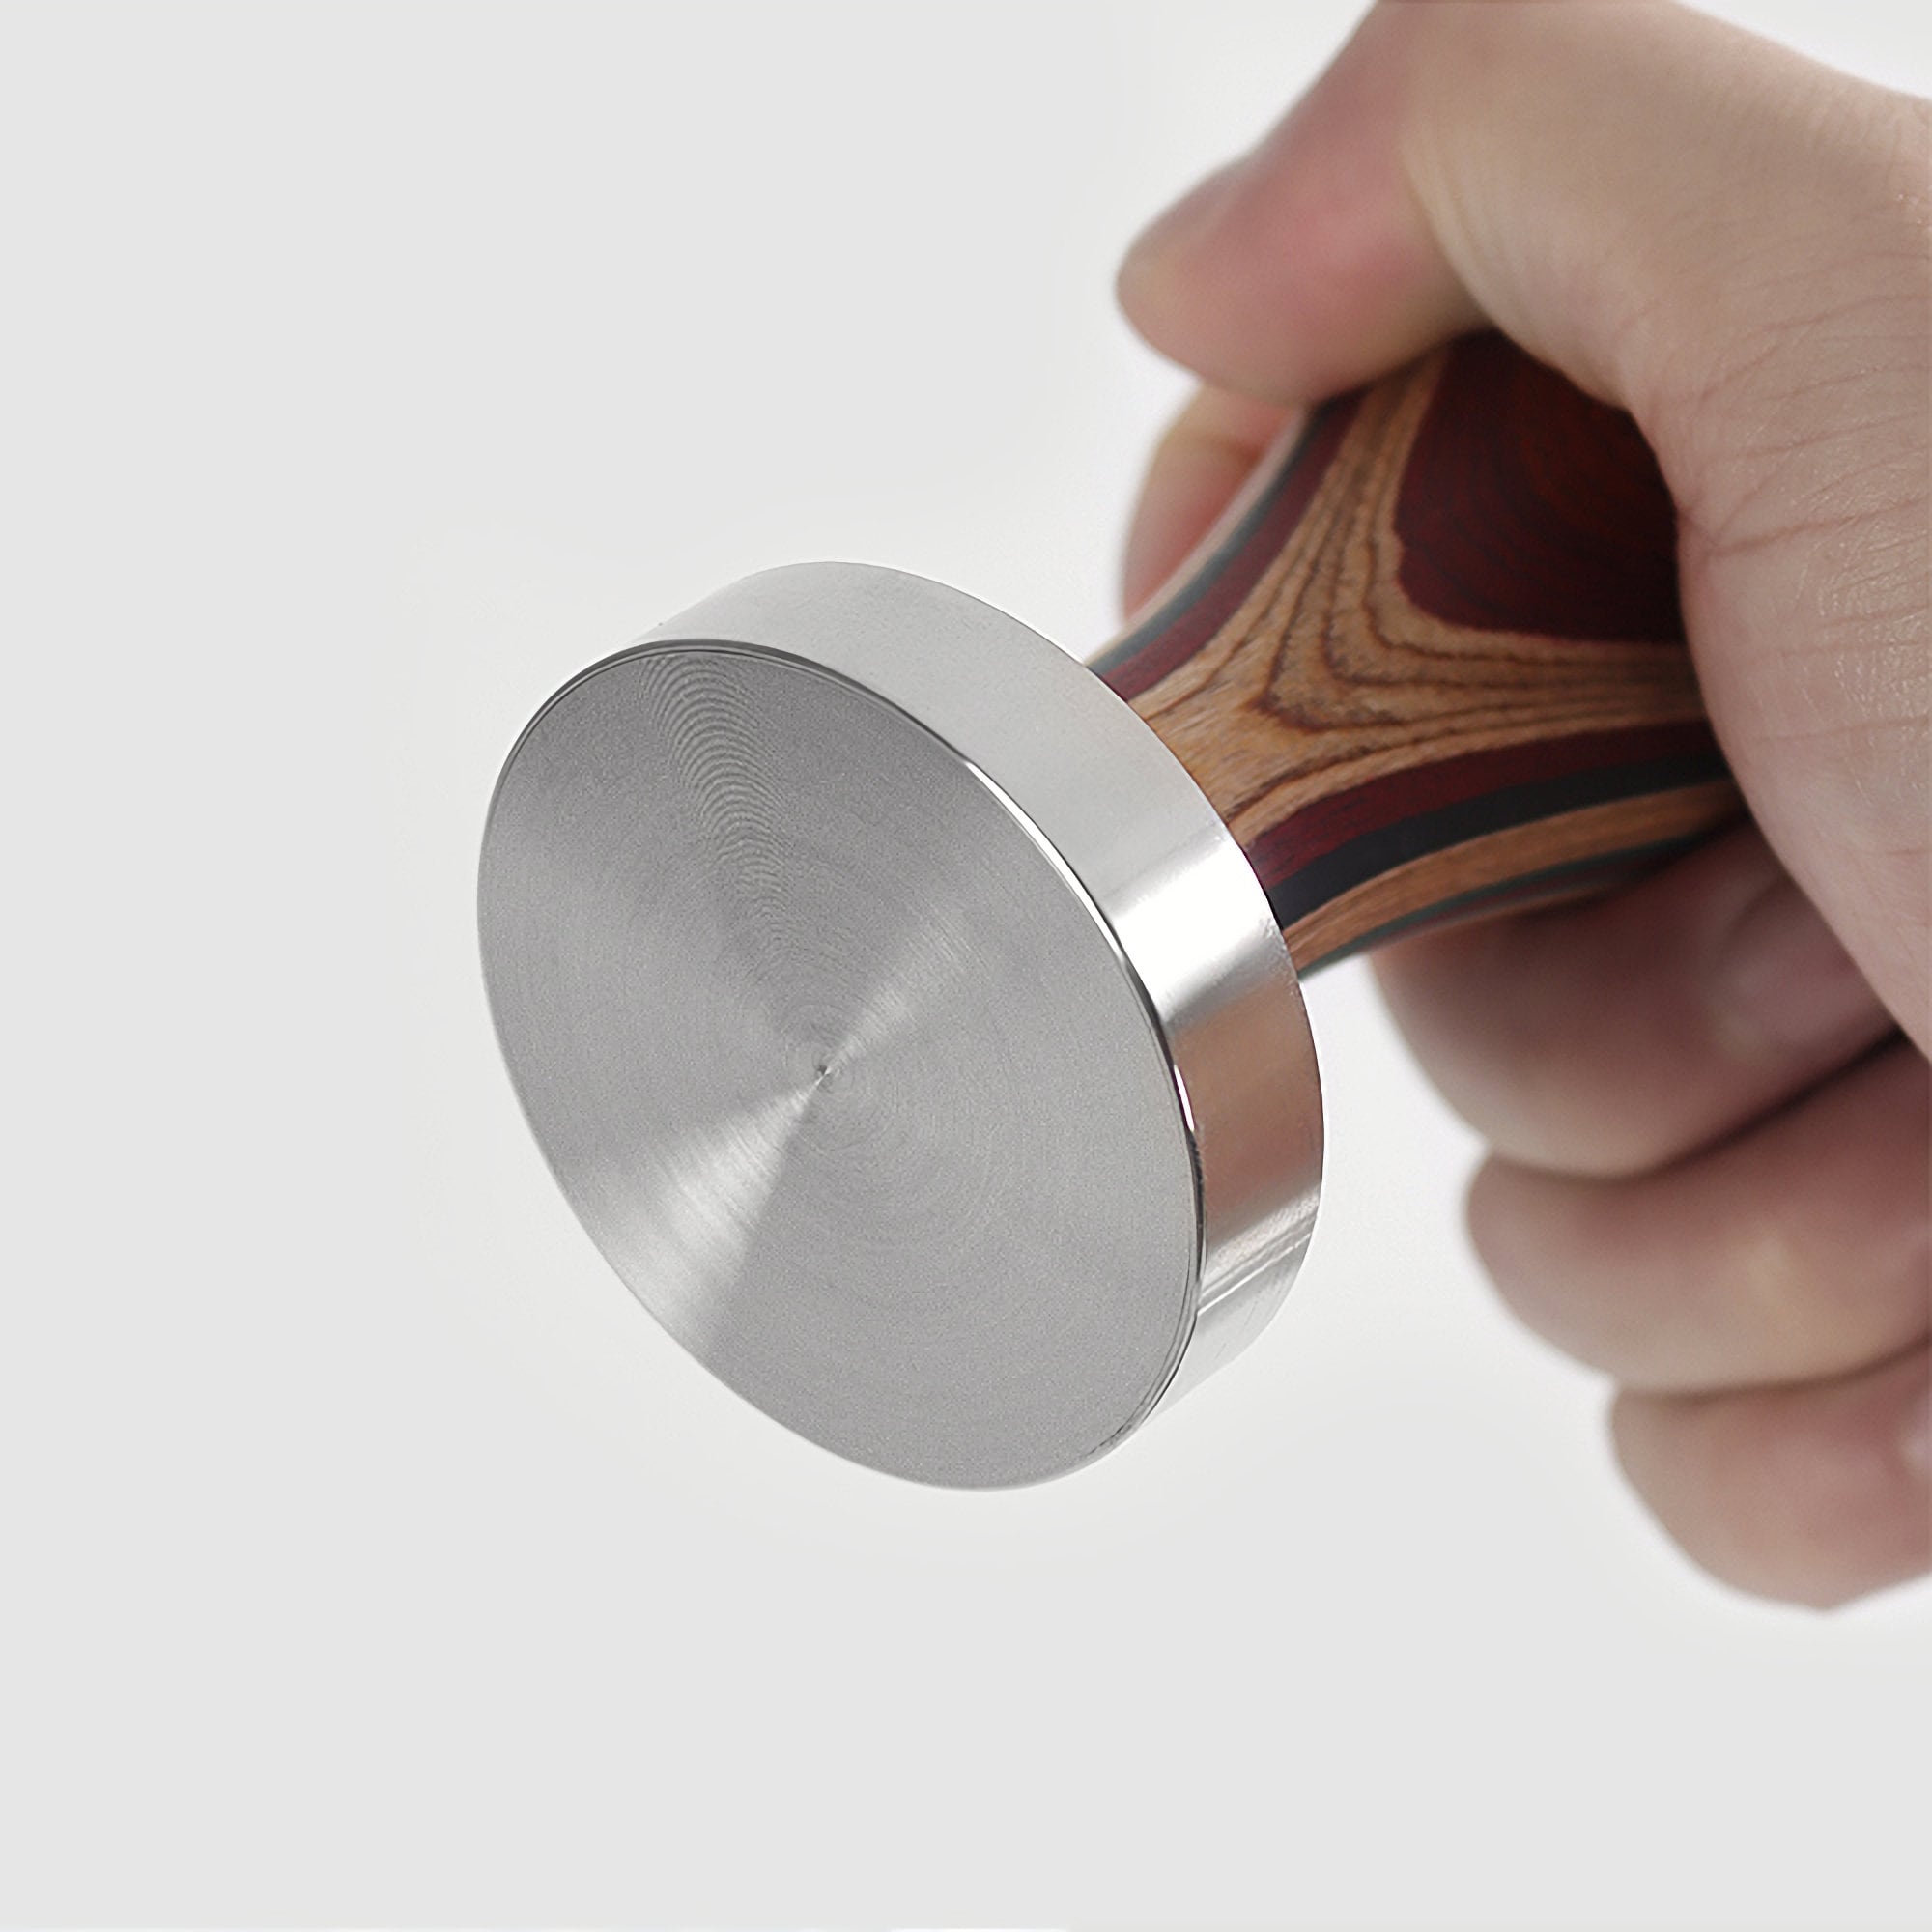 Wooden Espresso Tamper with Colorful Handle